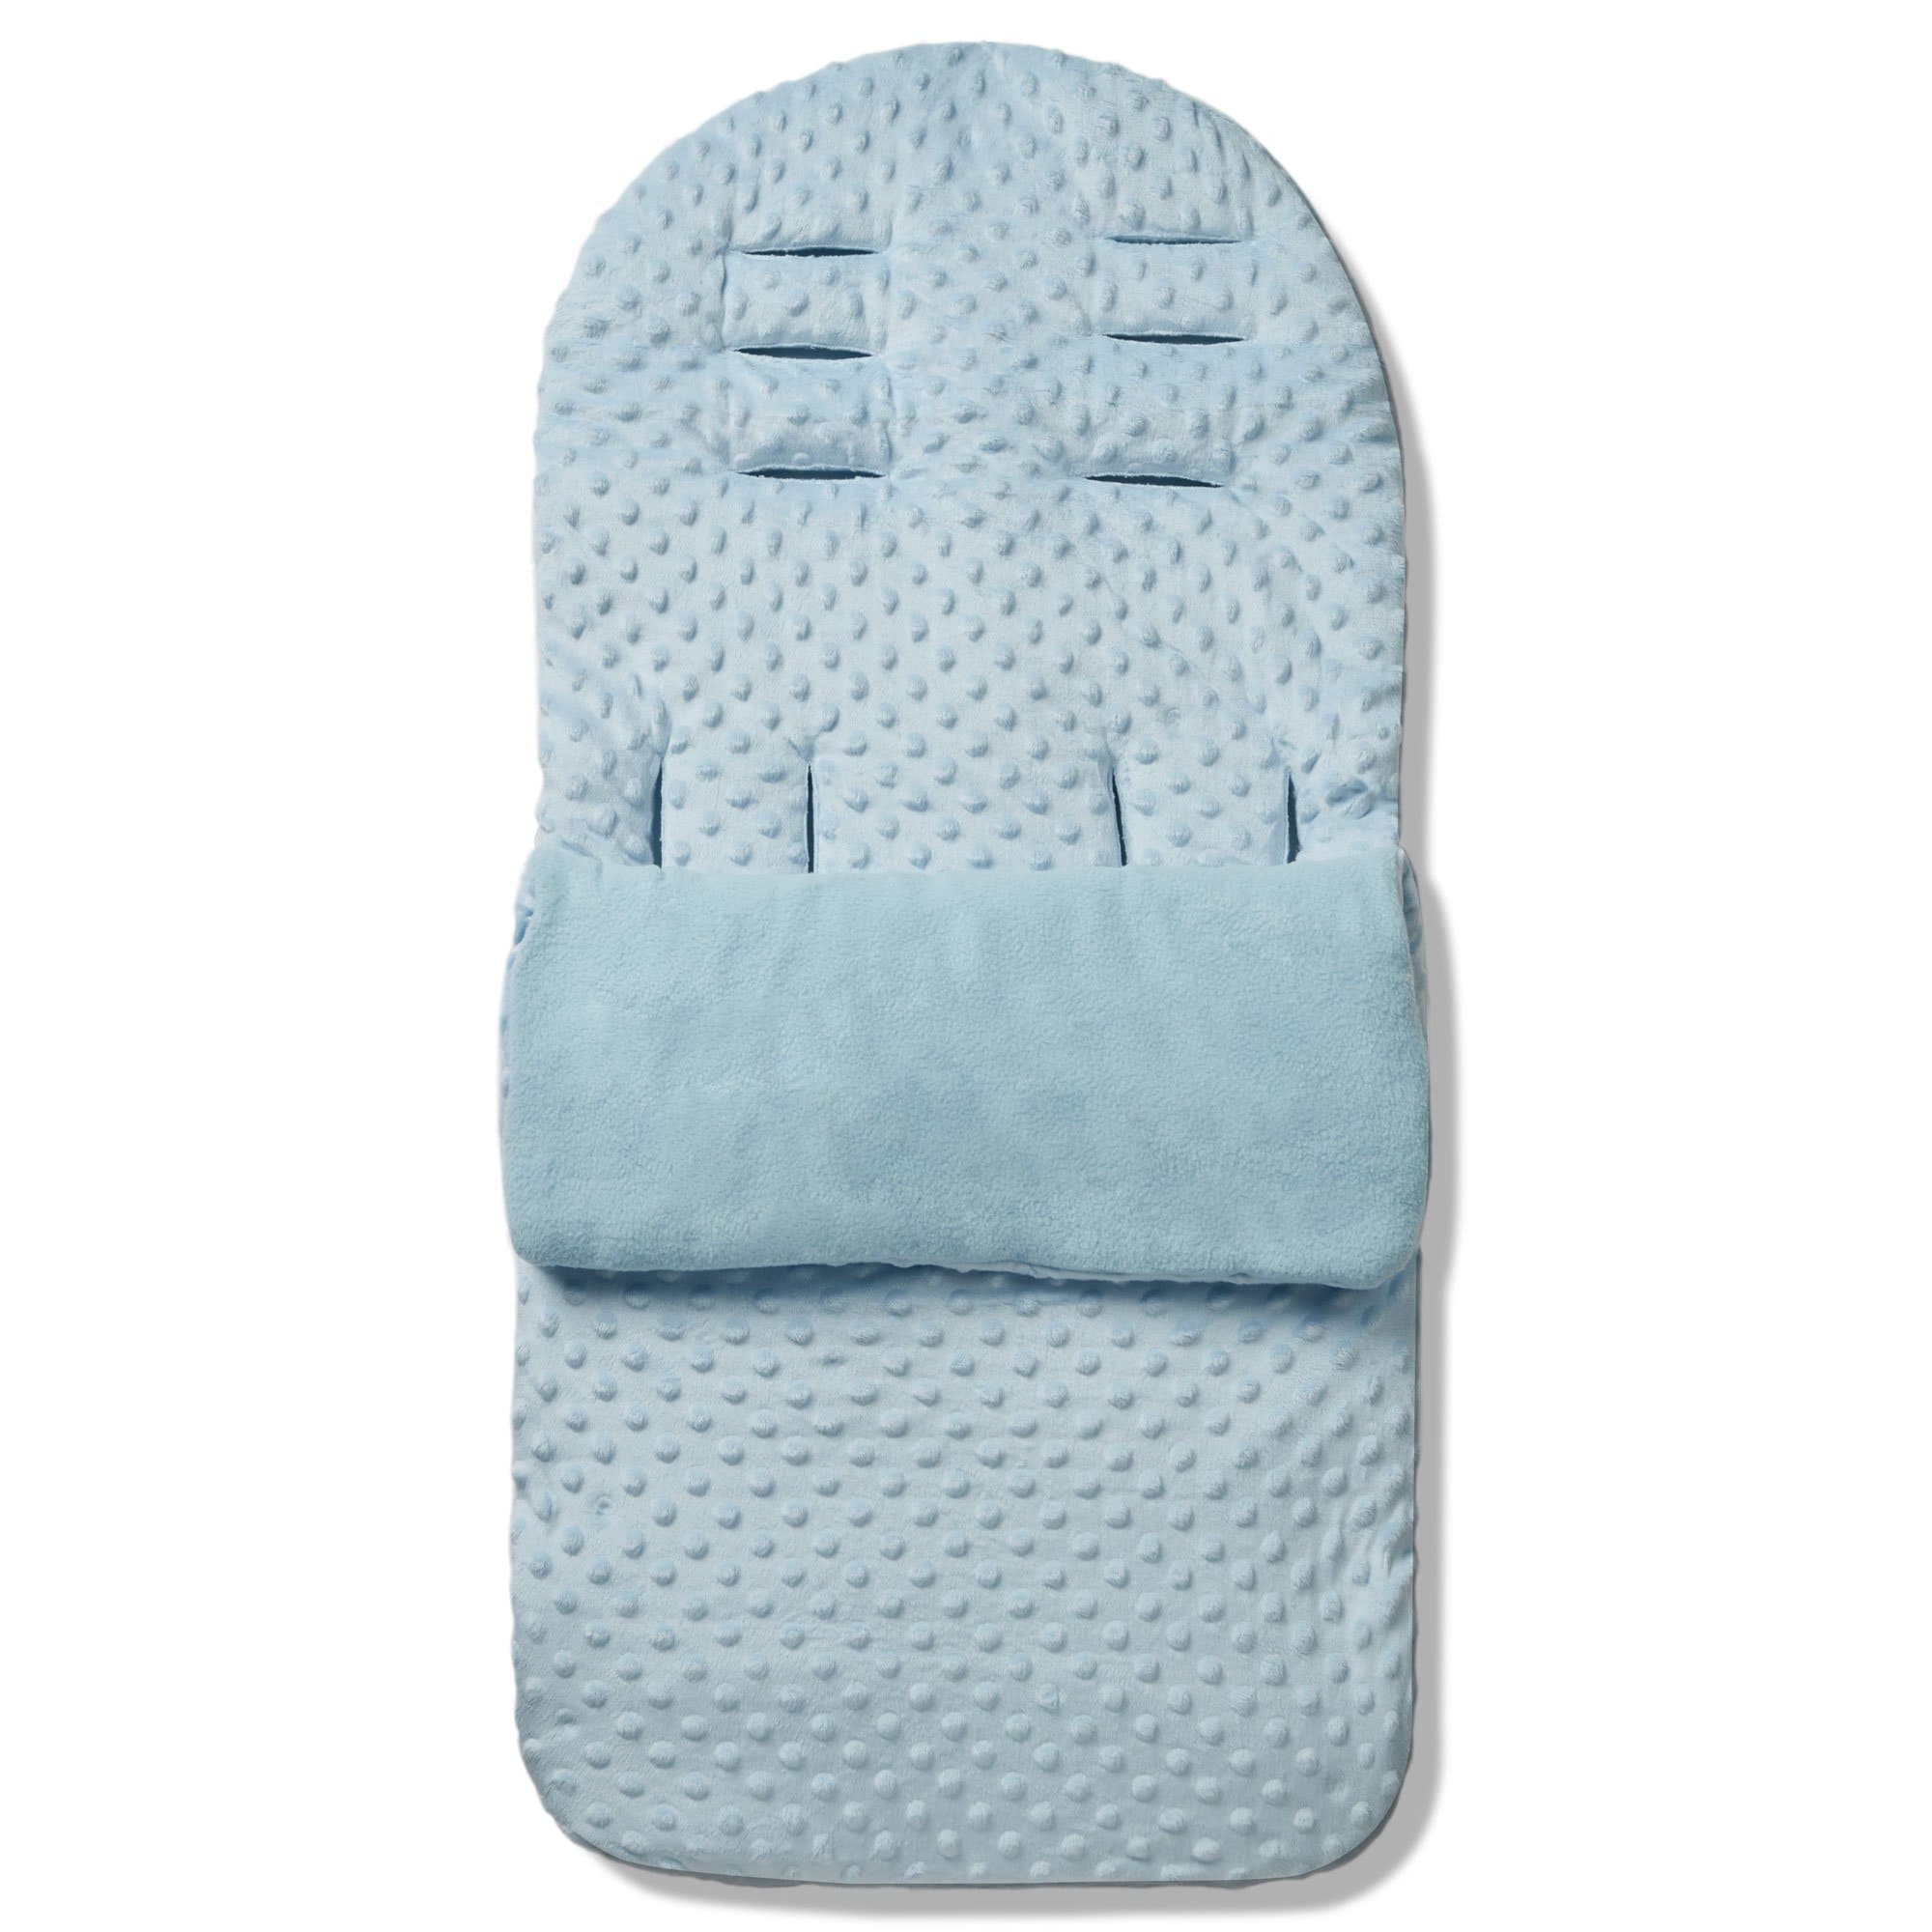 Dimple Footmuff / Cosy Toes Compatible with Brevi - For Your Little One